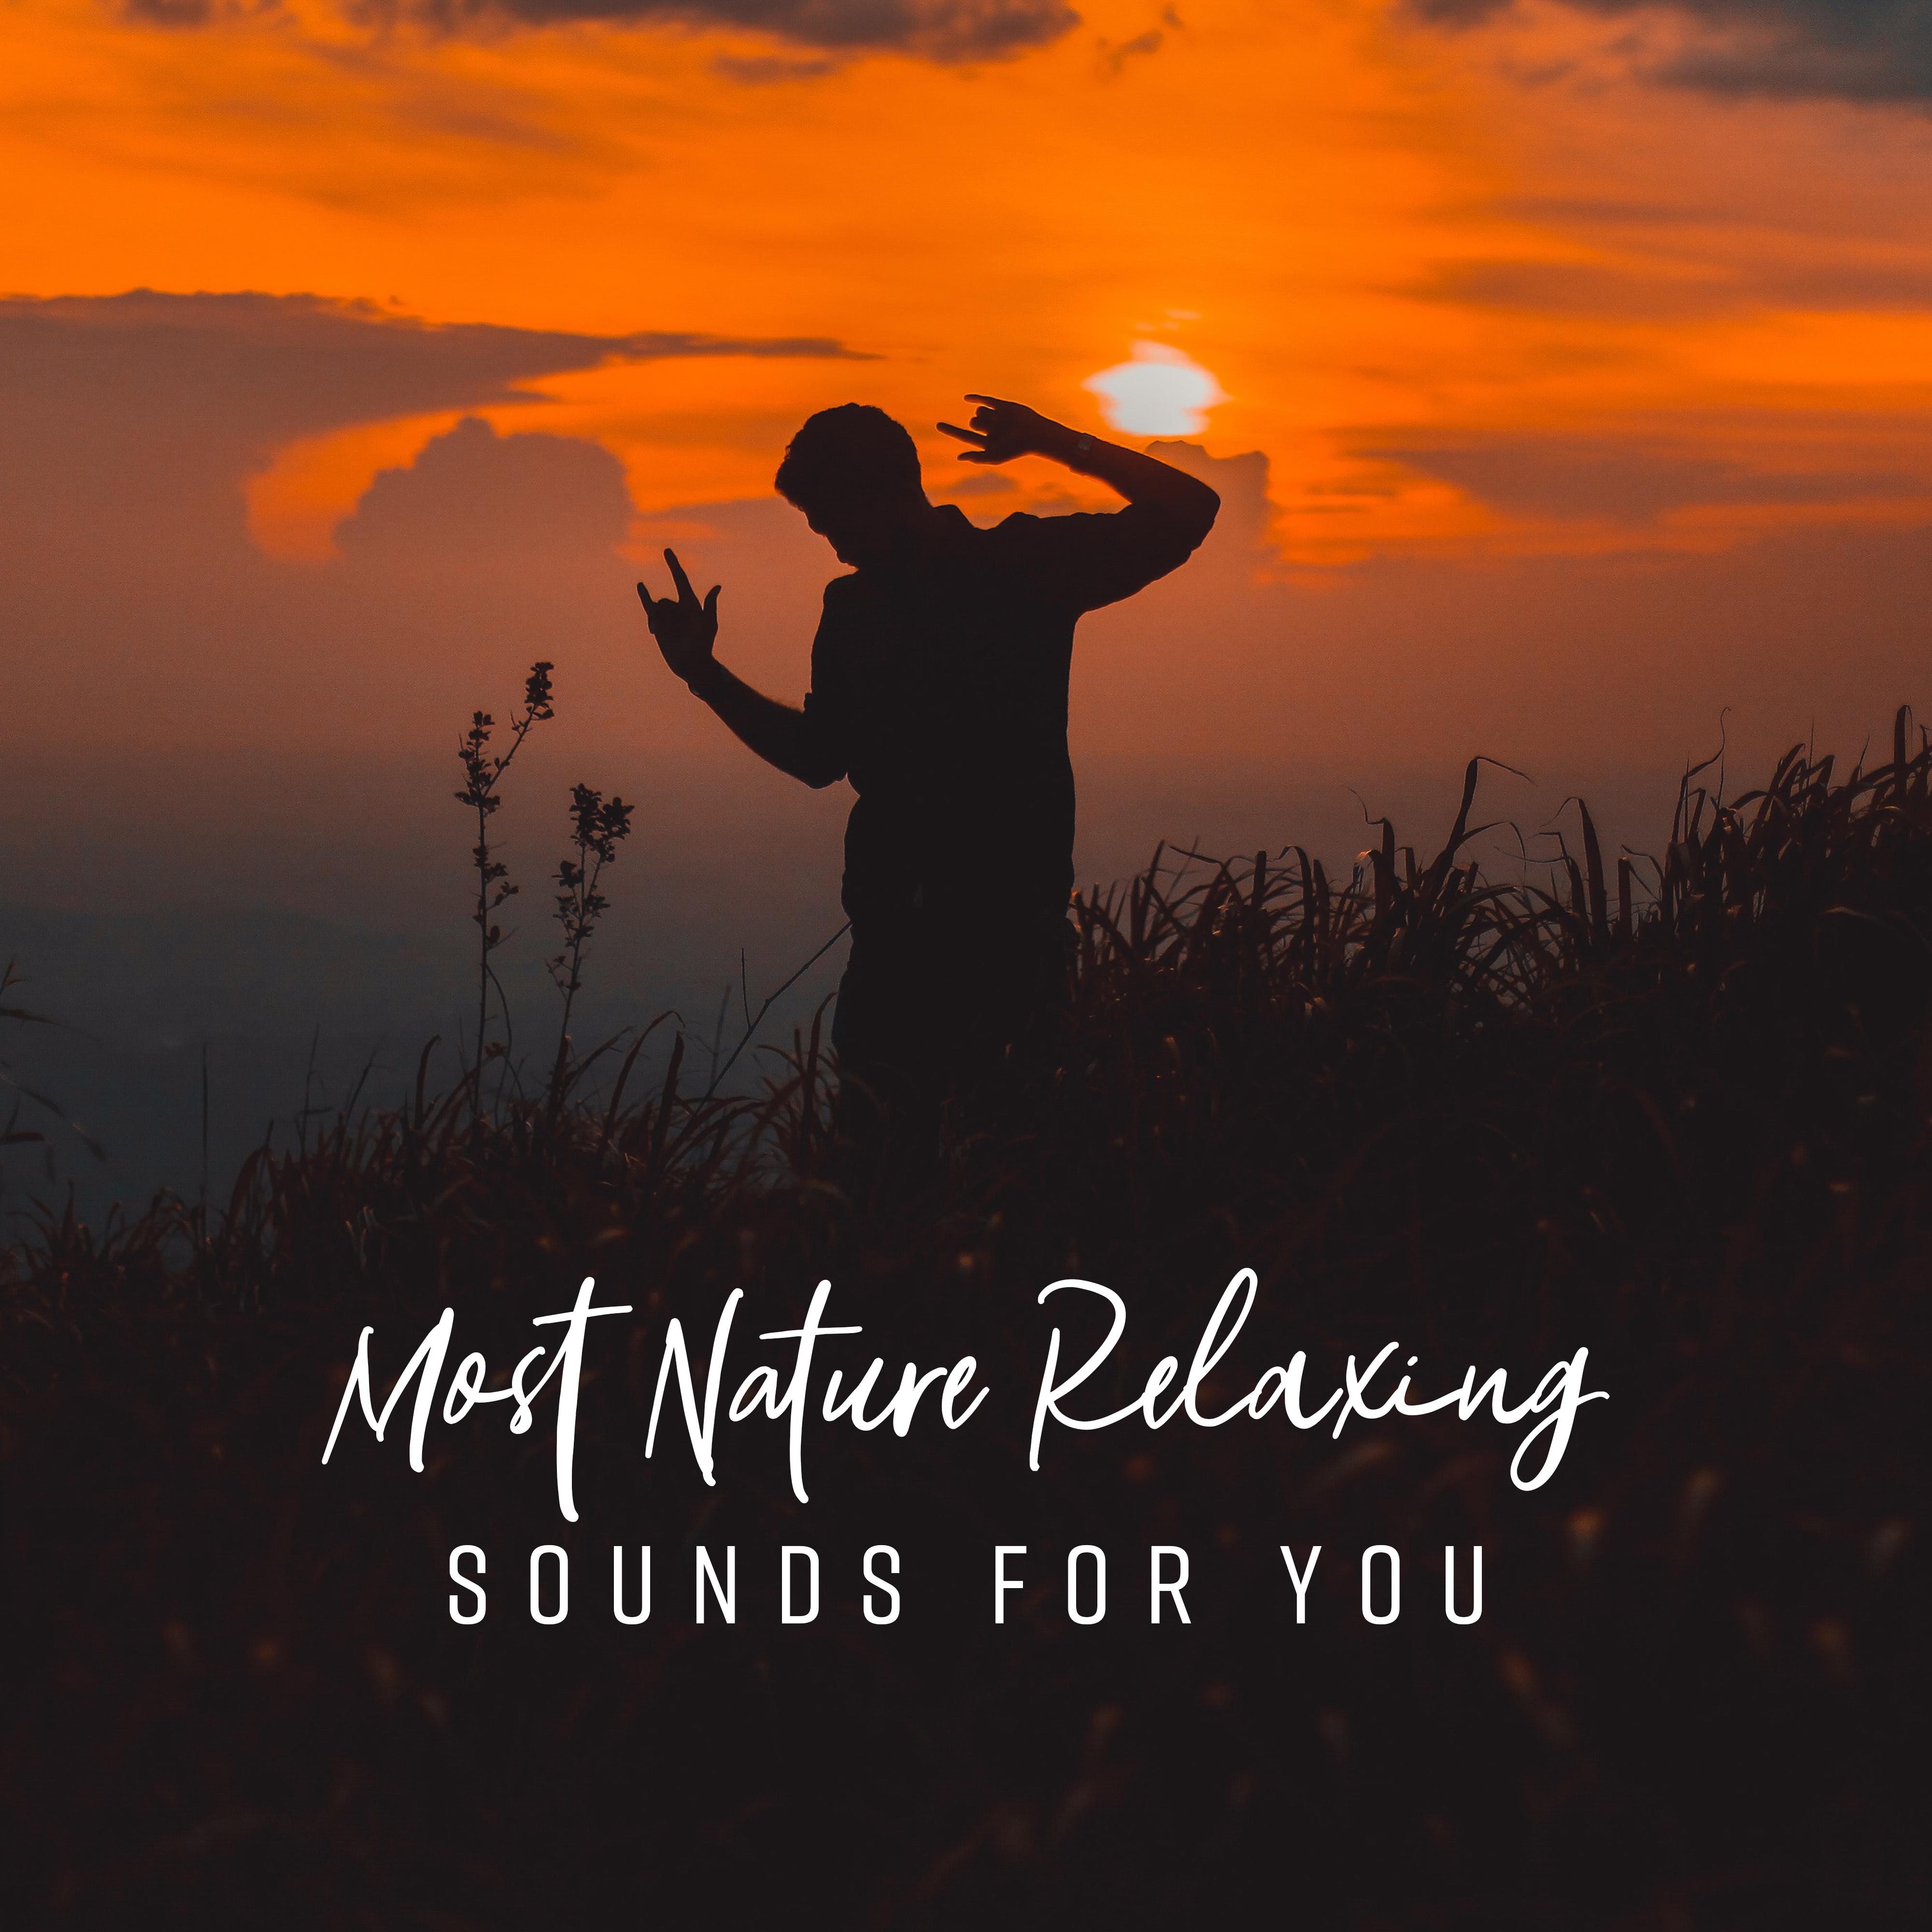 Most Nature Relaxing Sounds for You – Compilation of Nature 2019 New Age Music, Total Relaxation Sounds, Melodies to Calm Down, Stress Relief & Rest